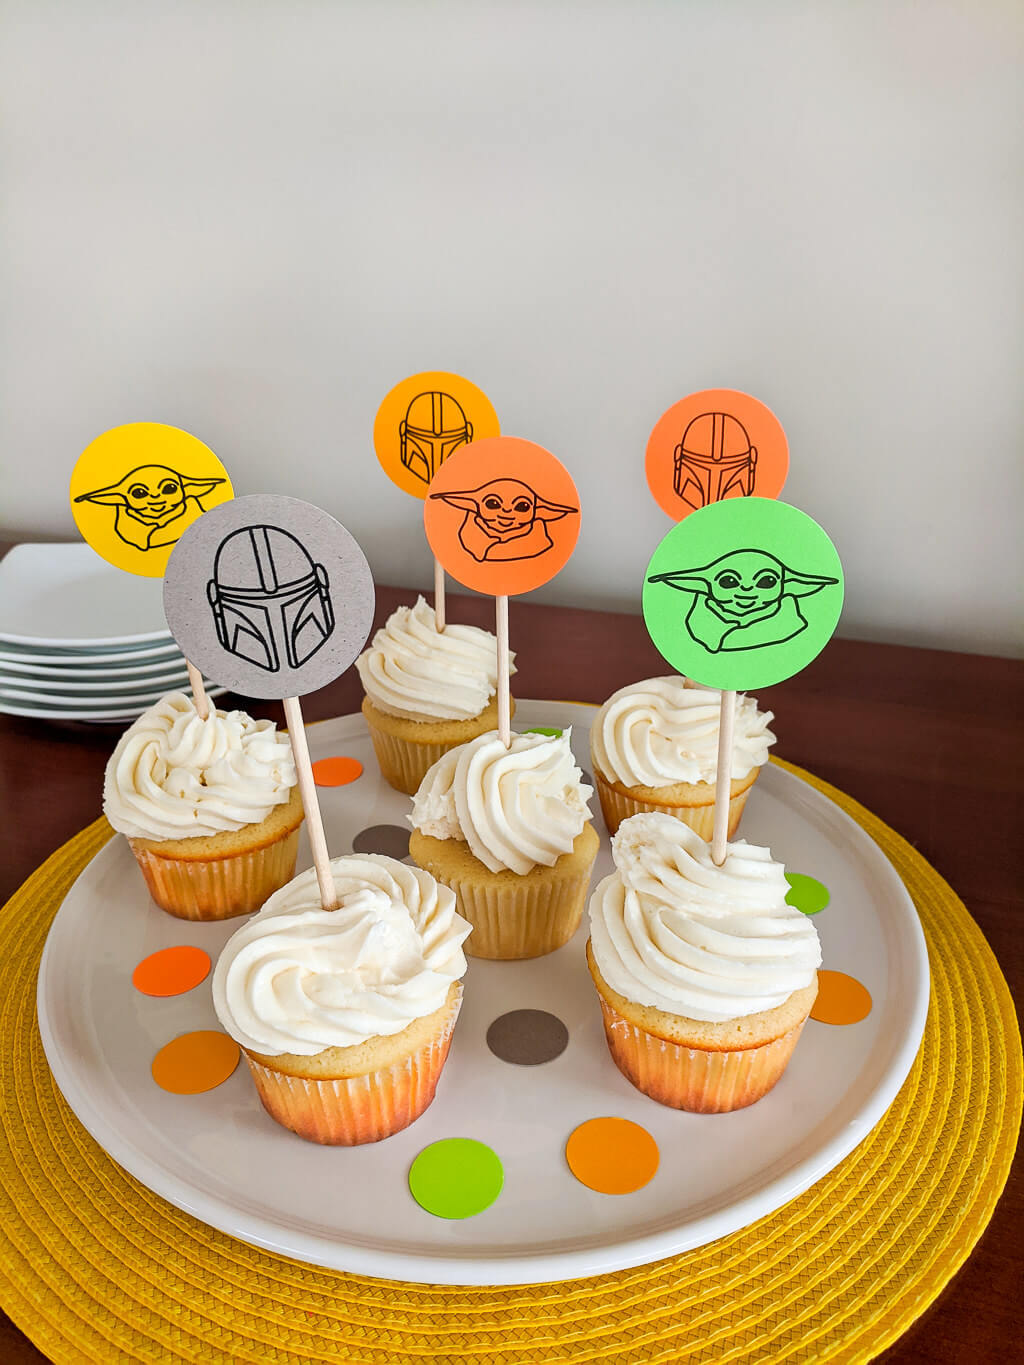 Mandalorian cupcakes with Baby Yoda The Child and Mandalorian helmet cupcake toppers